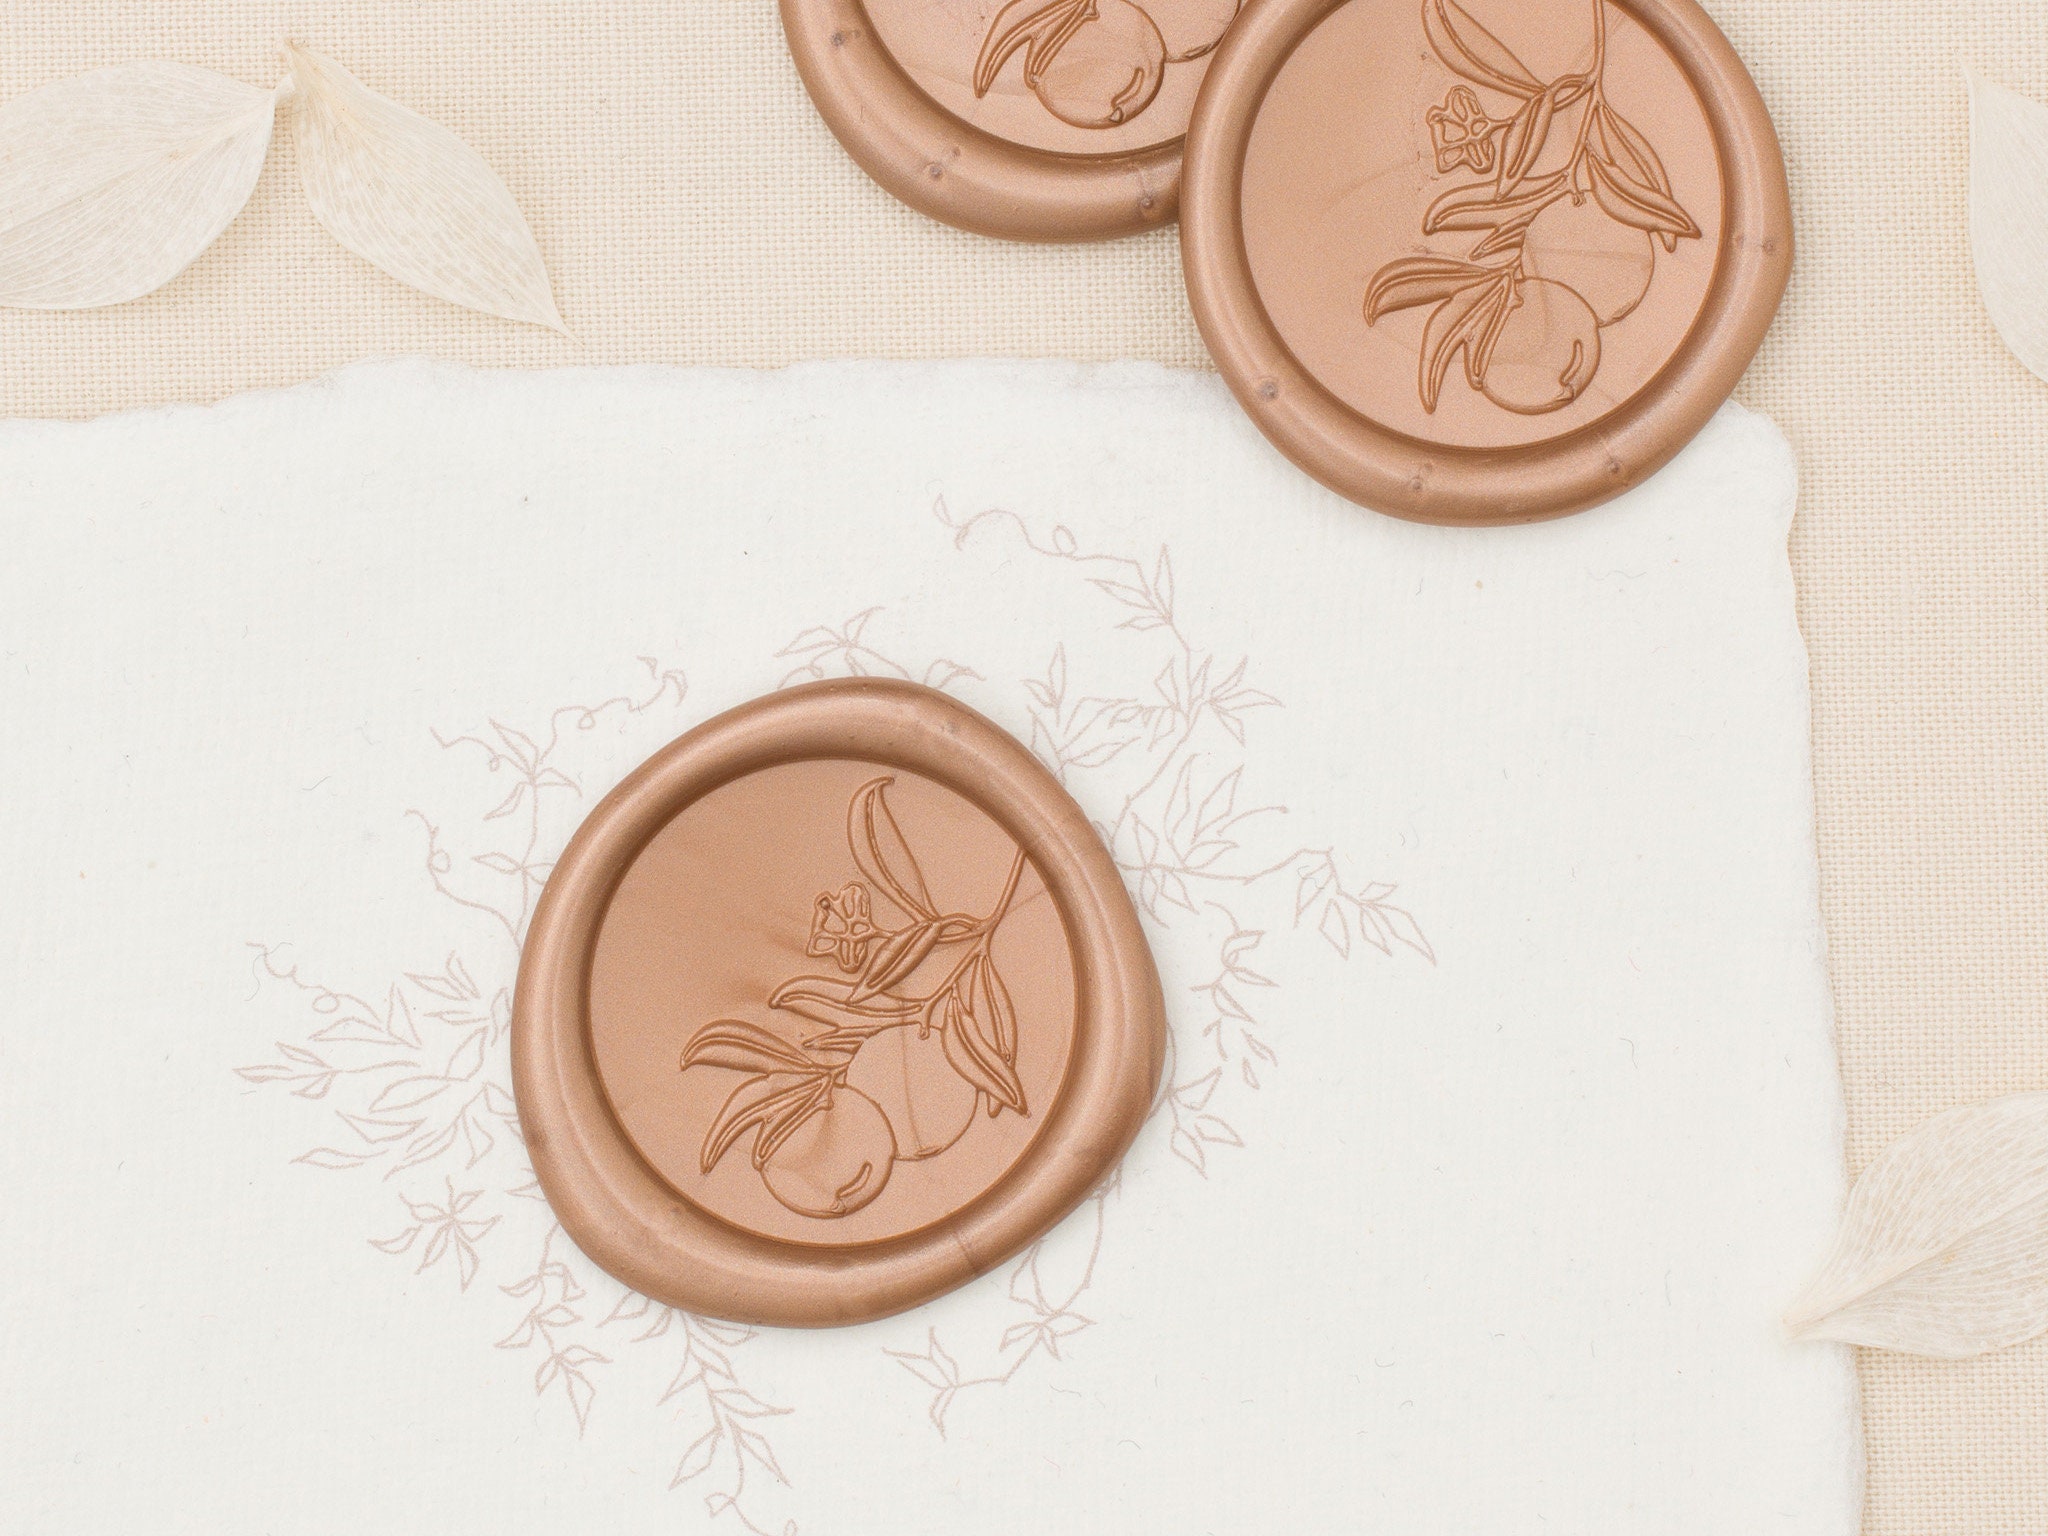 Gold Love Faux Wax Envelope Seals by Recollections™